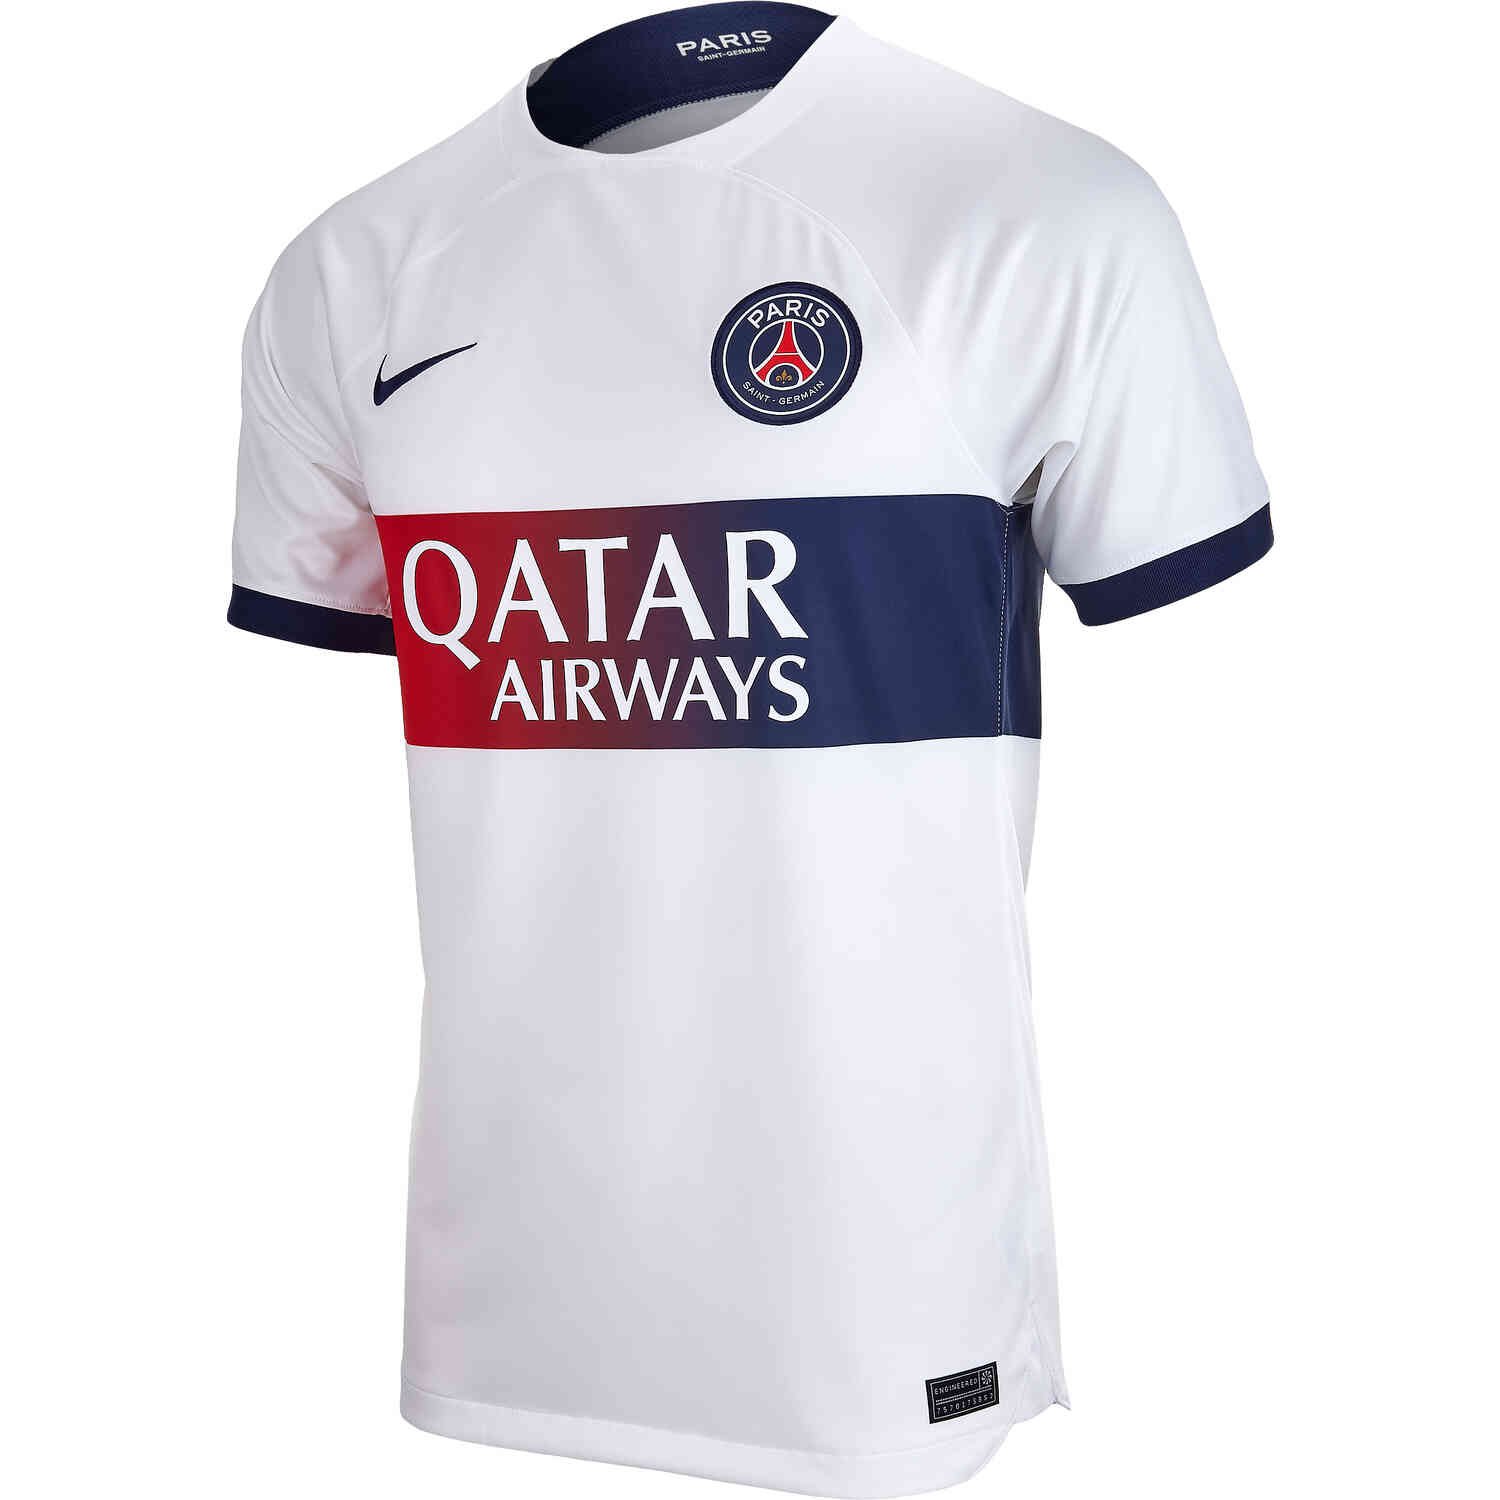 Paris Saint-Germain's new away kit might be the most beautiful of all the  new releases